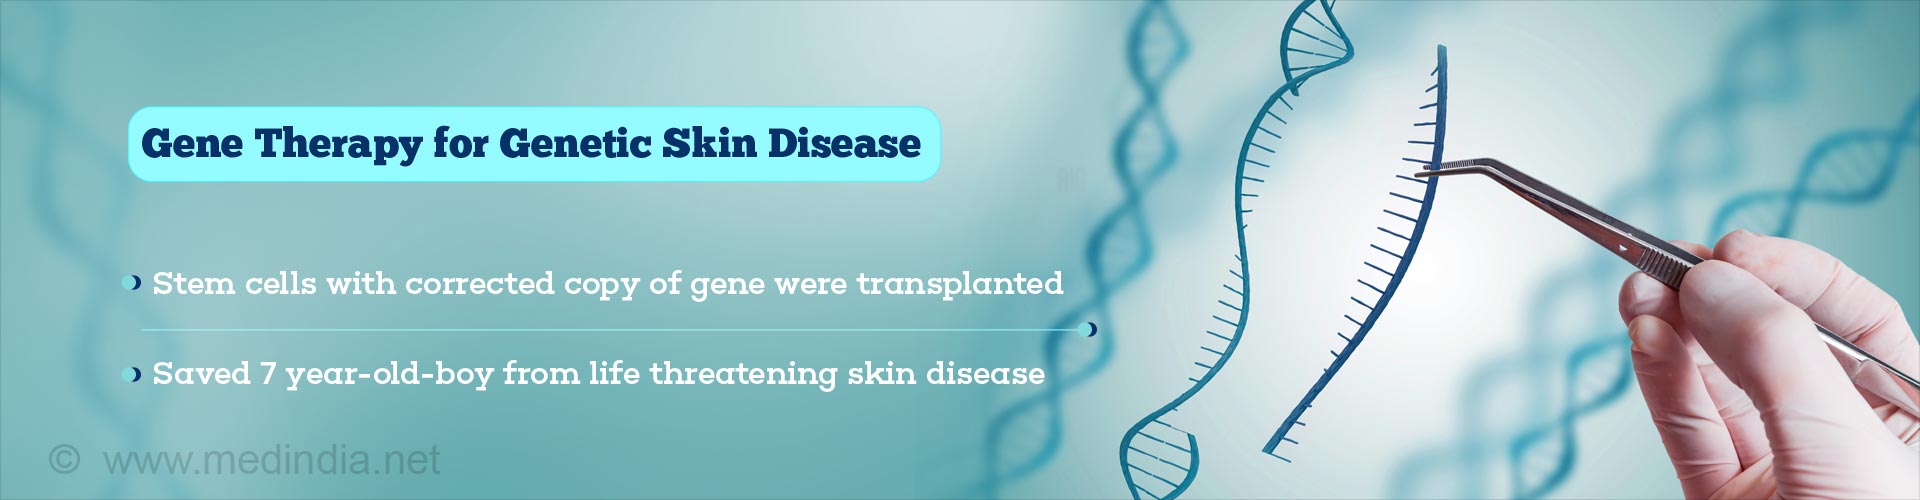 gene therapy for genetic skin disease
- stem cells with corrected copy of gene were transplanted
- saved 7 year-old-boy from life threatening skin disease